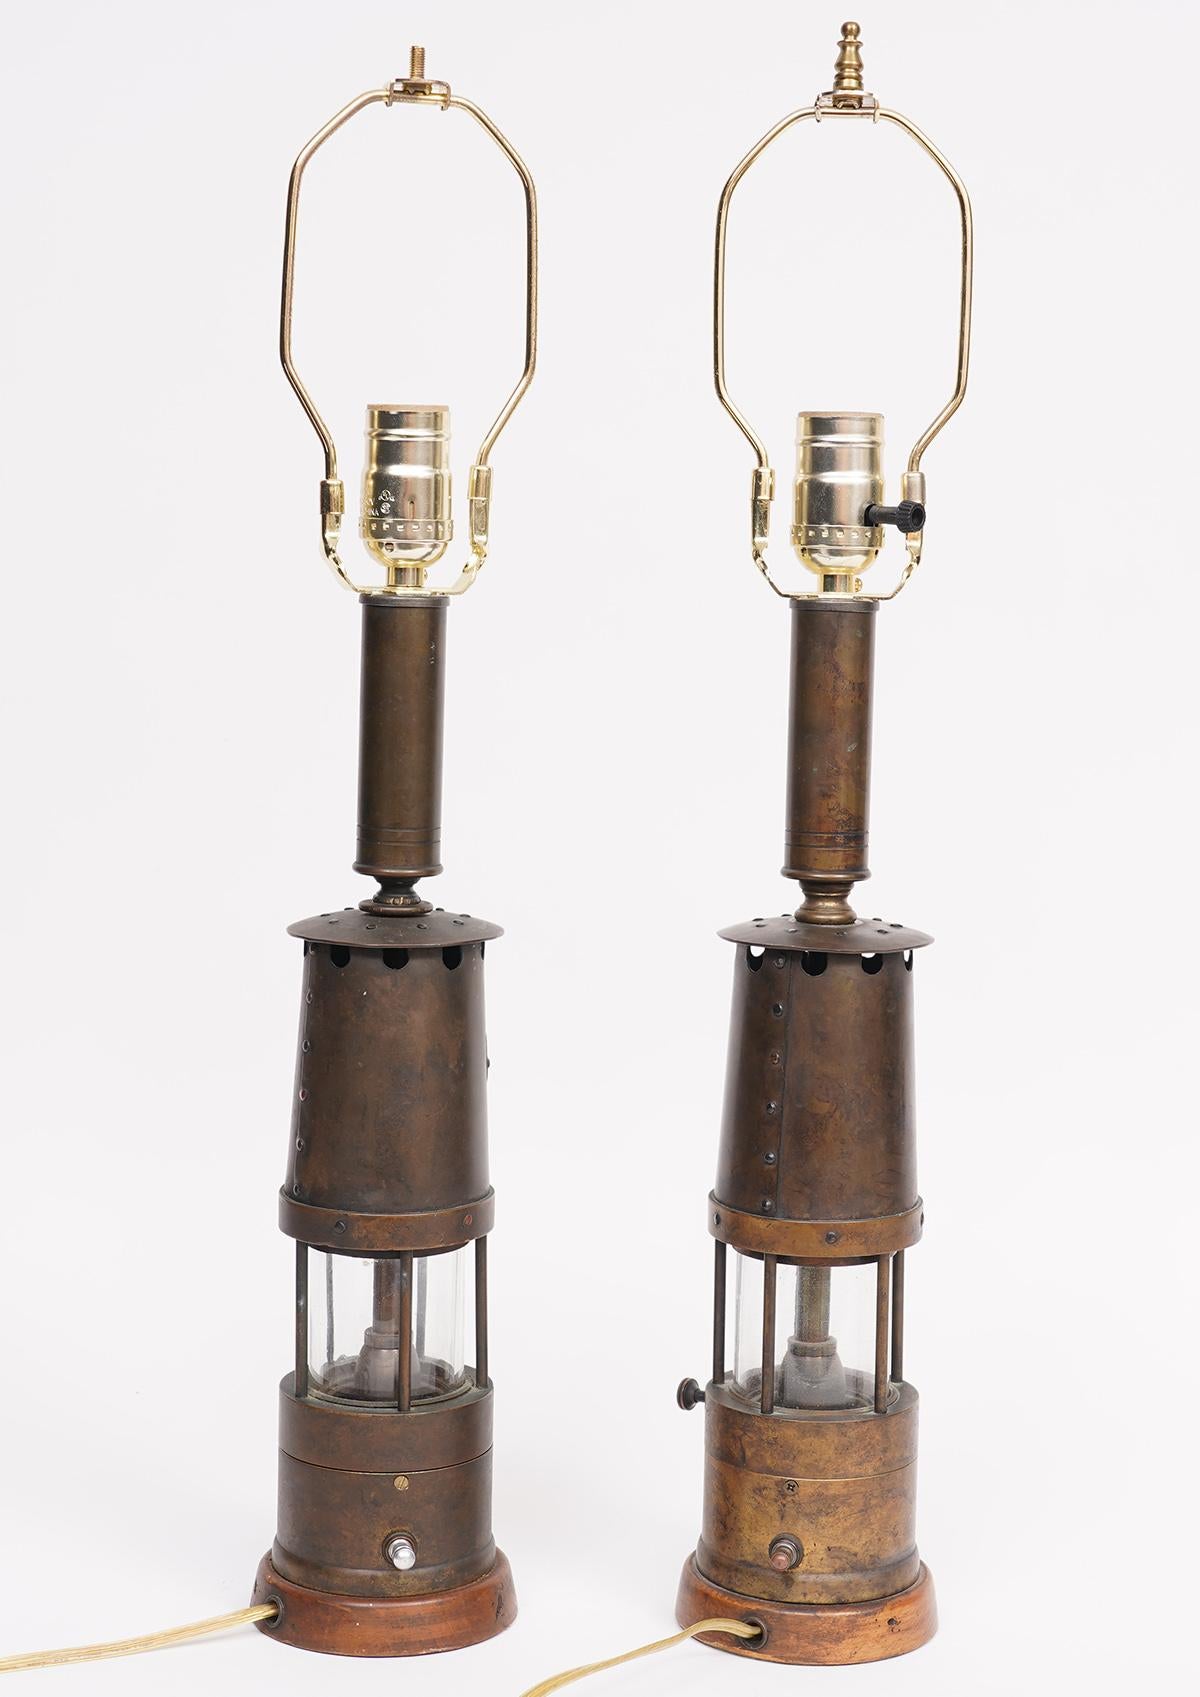 Brass Pair of Industrial Miner's Lanterns Marked Dinkelspiel Converted to Table Lamps